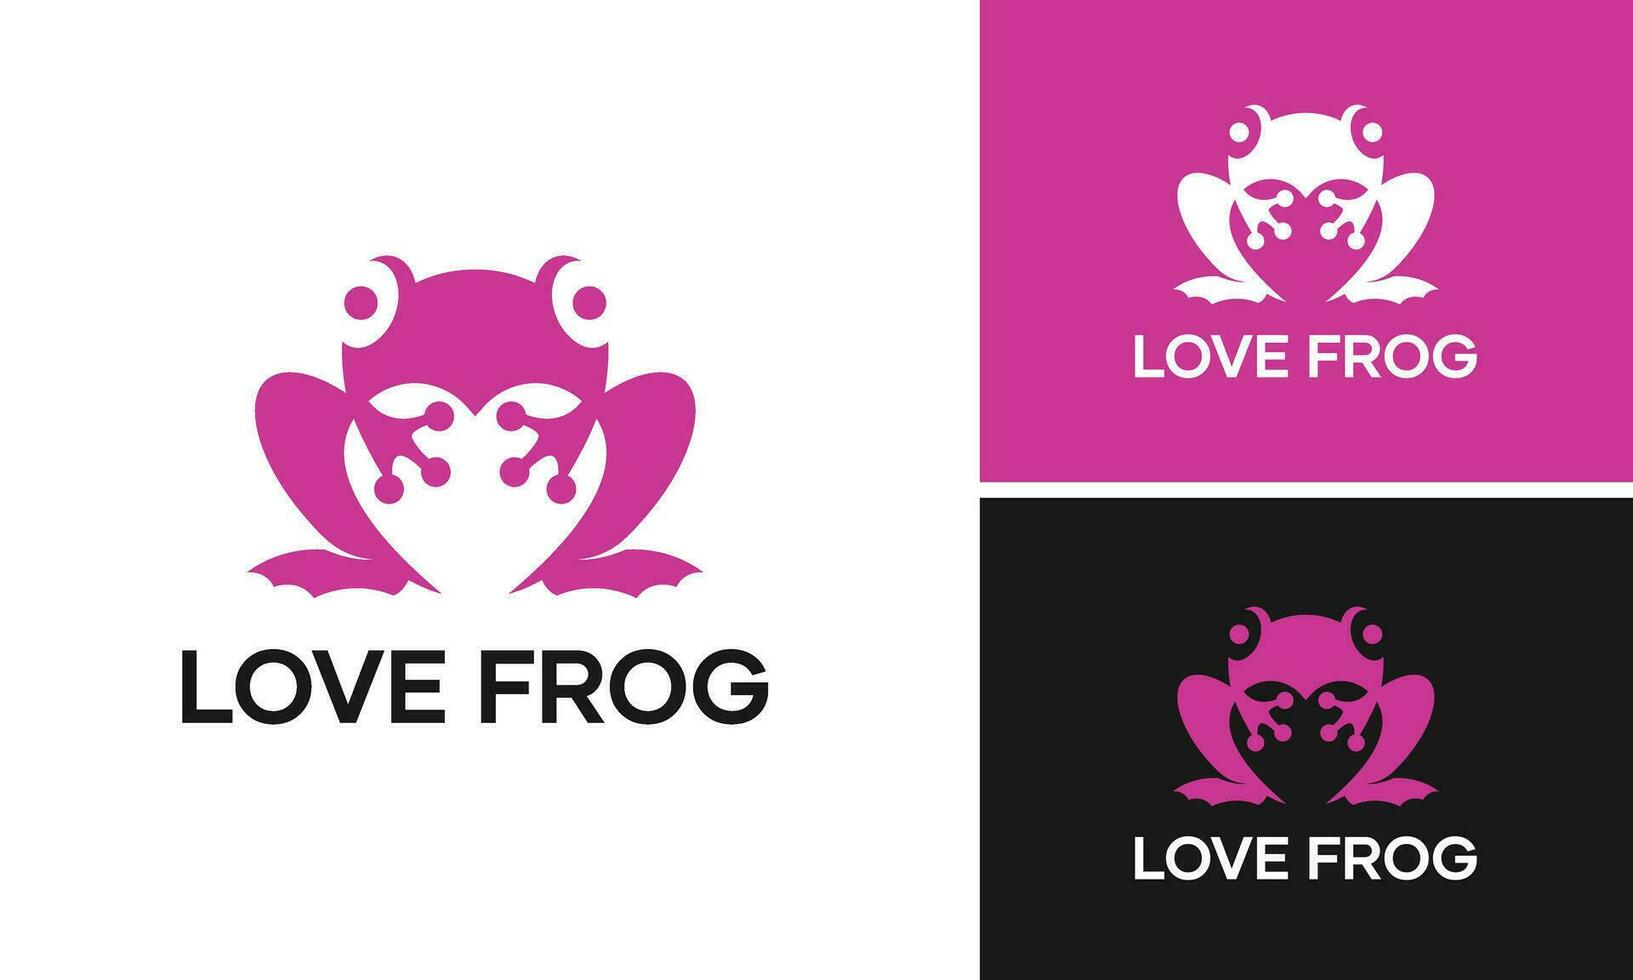 Frog logo design with negative space heart icon vector